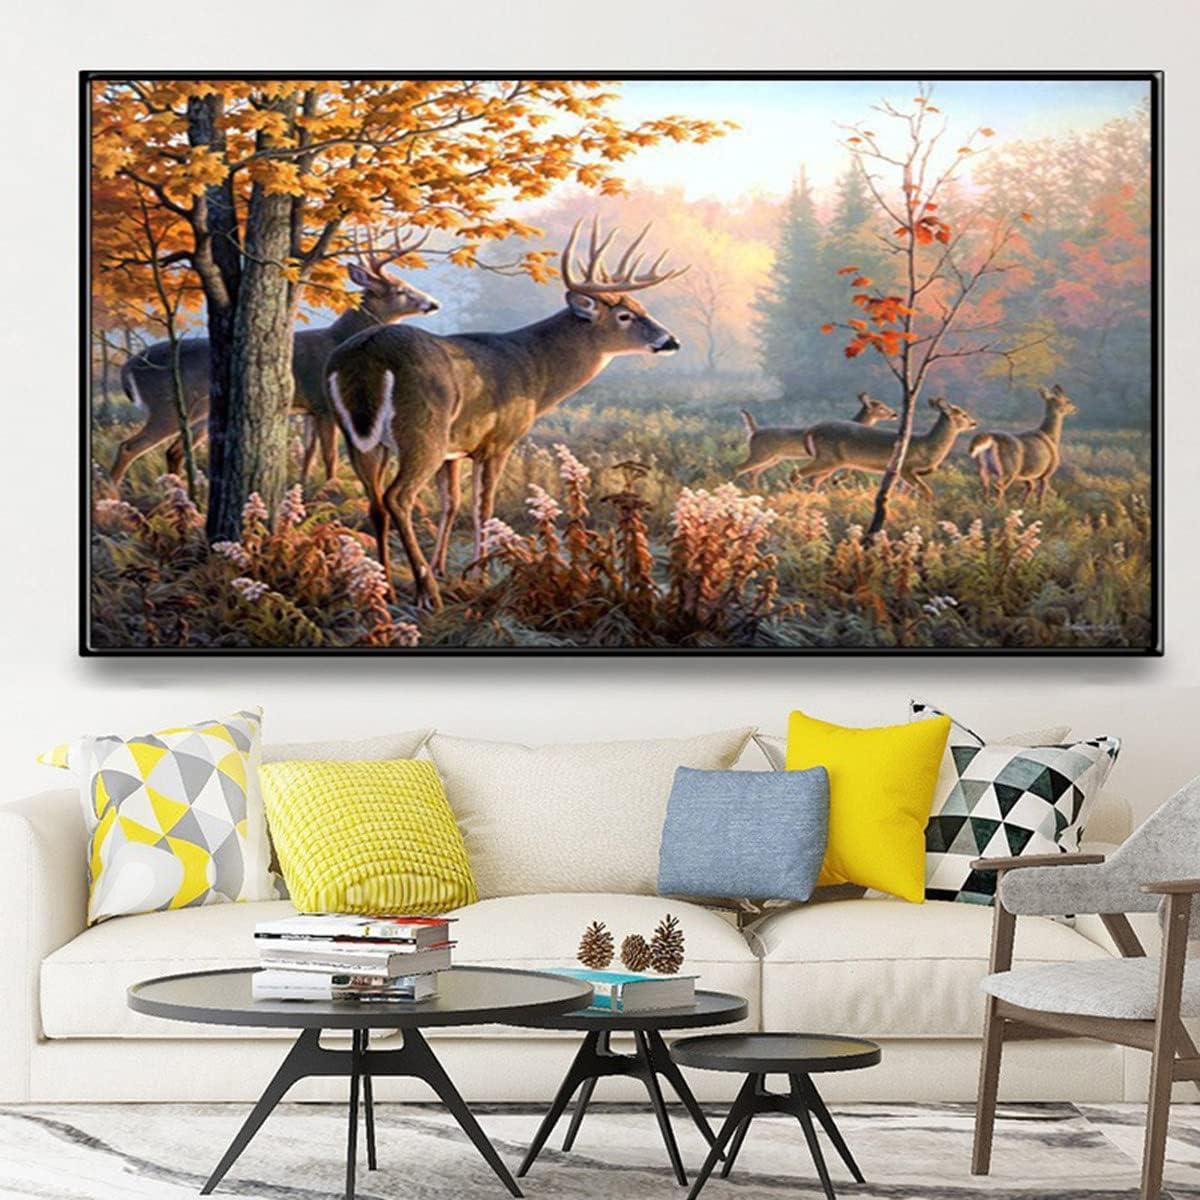 Instarry 5D Diamond Painting Kits for Adults Large Size Full Drill Tree and  Elk Mosaic Cross Stitch Family Wall Decor Arts and Crafts 47.2x19.7 inch  Tree and Elk 120x50cm (47.2x19.7in)